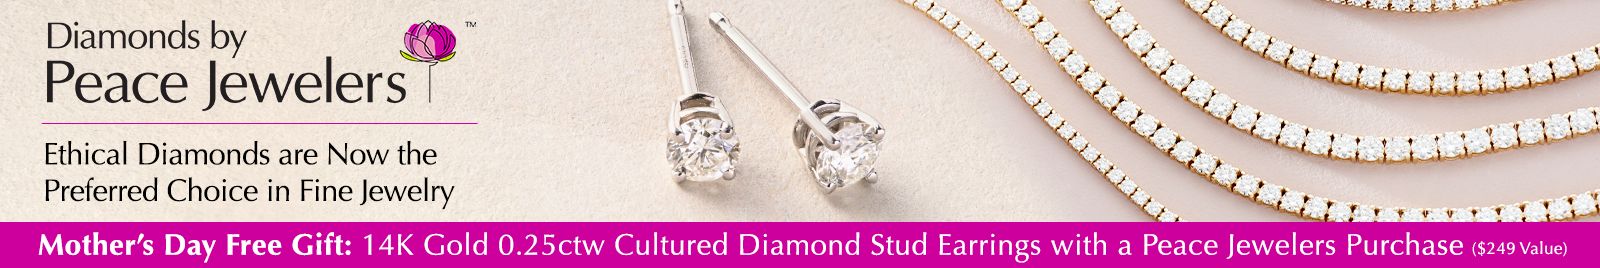 Peace Jewelers - Mother’s Day Free Gift: 14K Gold 0.25ctw Cultured Diamond Stud Earrings with a Peace Jewelers Purchase ($249 Value)|  213-553